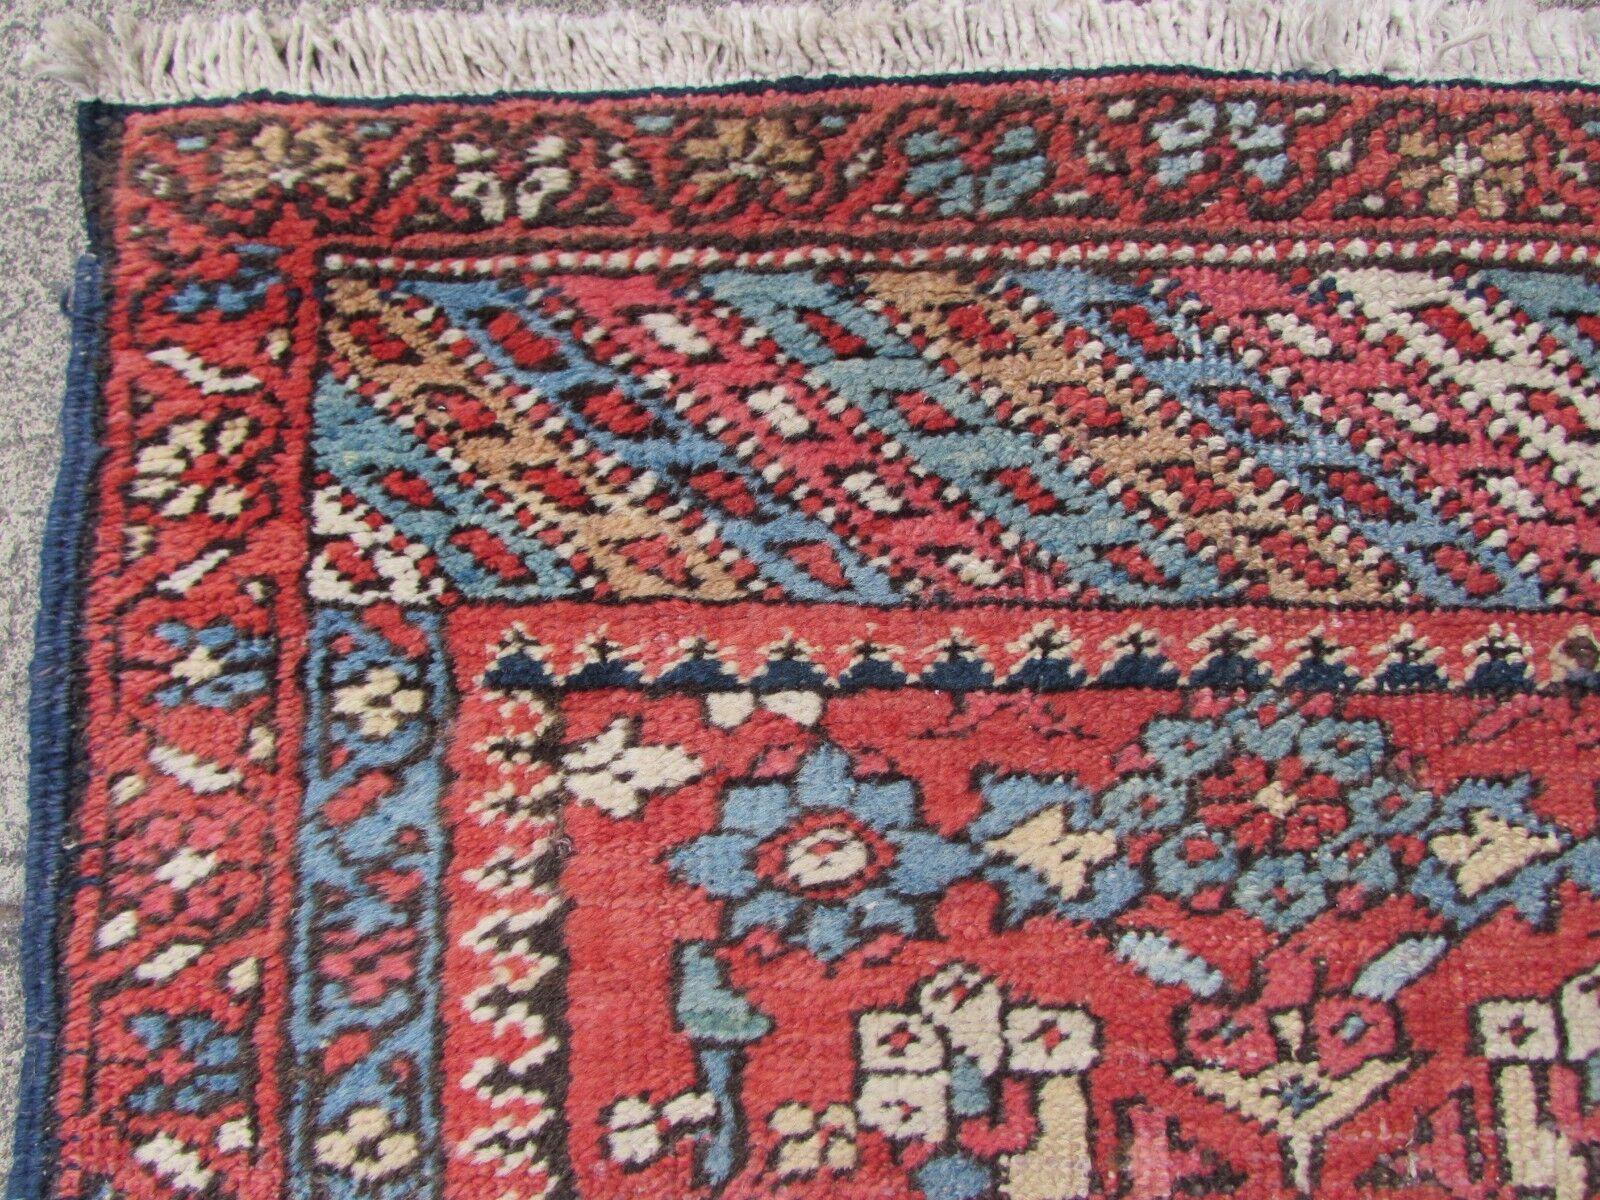 Handmade Antique Persian Style Mahal Runner Rug 2.5' x 12.1', 1920s, 1Q57 In Good Condition For Sale In Bordeaux, FR